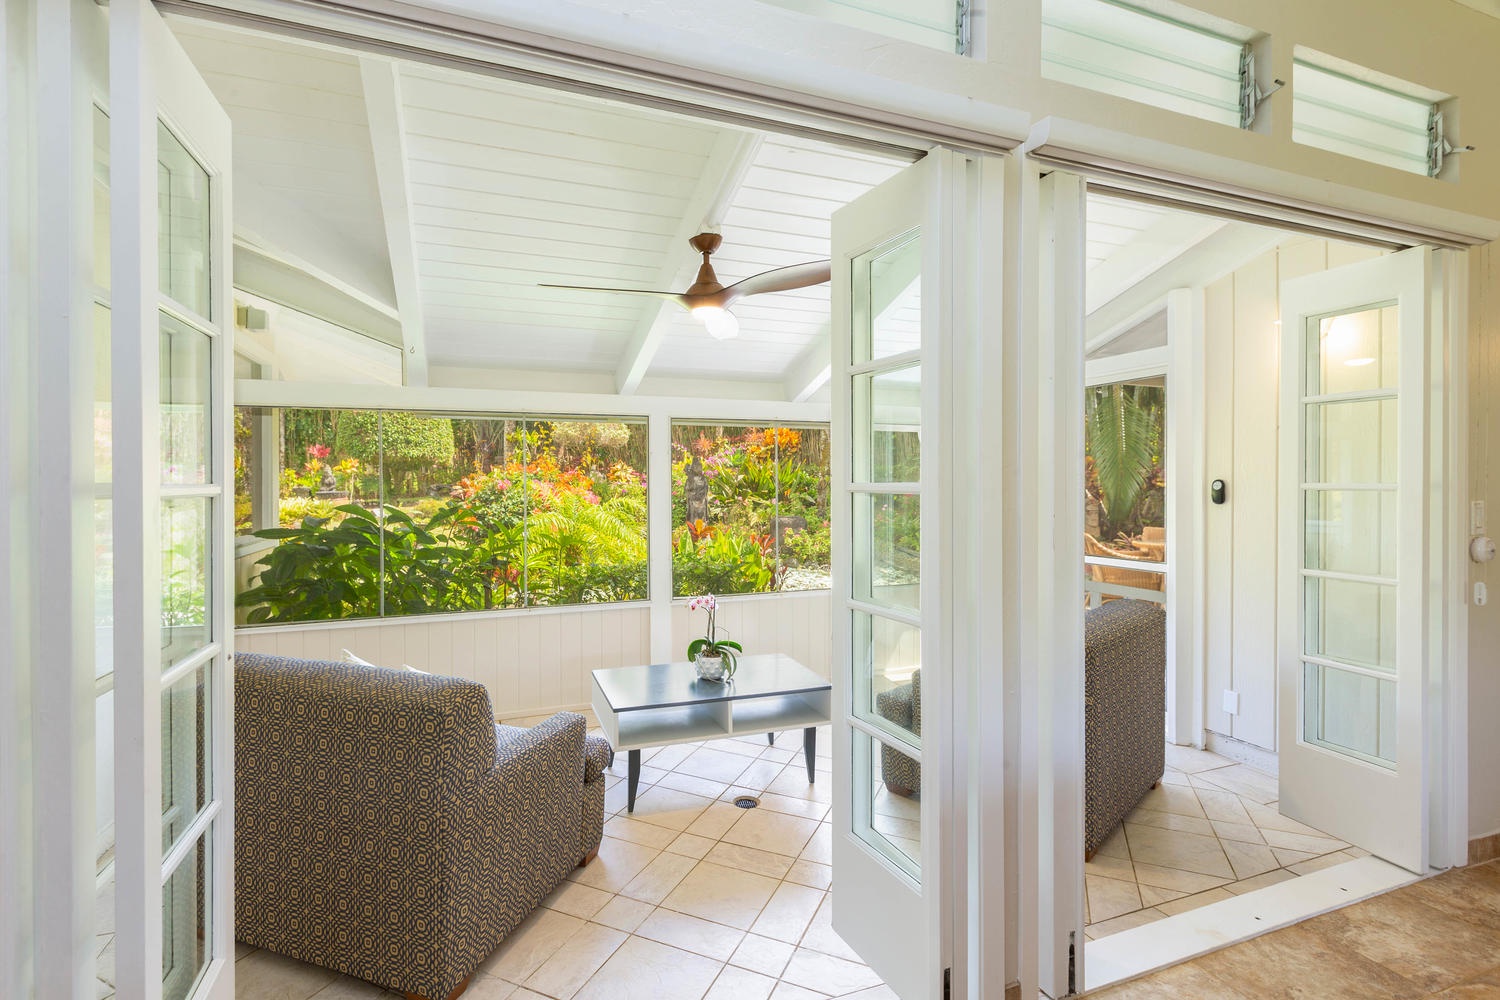 Princeville Vacation Rentals, Mala Hale - Screened lanai offers privacy and a cozy space to read, or enjoy a cup of Kona coffee